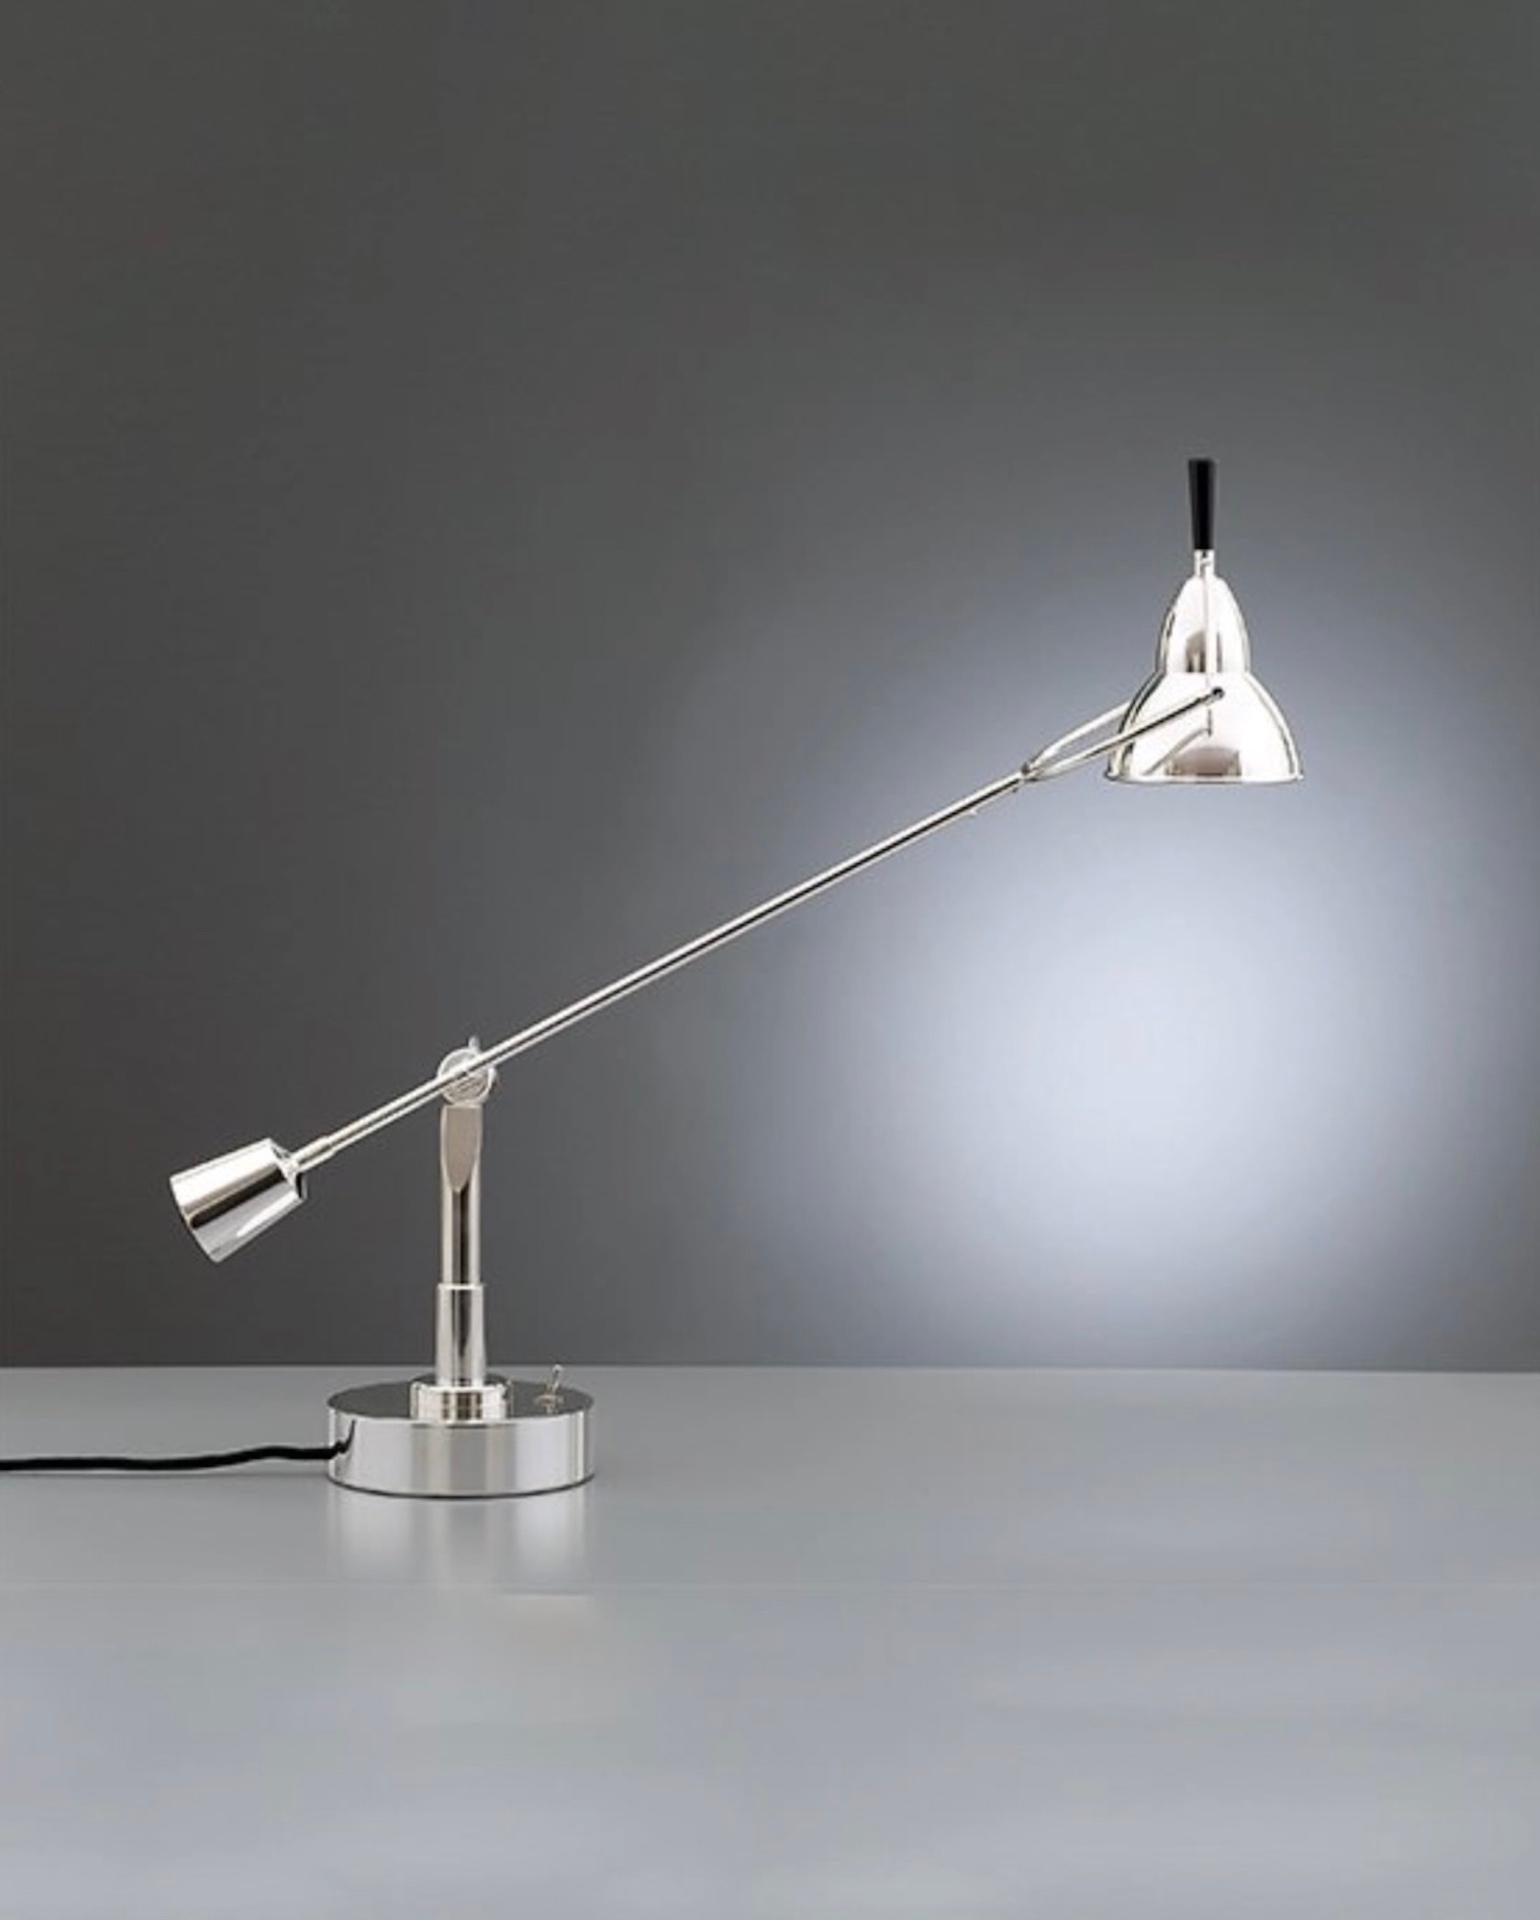 At 4.29 p.m. on 9th February, 1927 Eduard-Wilfrid Buquet feild his patent for parts of this table lamp, particularly the flexible joints, at the Ministère du Commerce et l'Industrie in Paris. Various versions were produced until the 1940's. Although